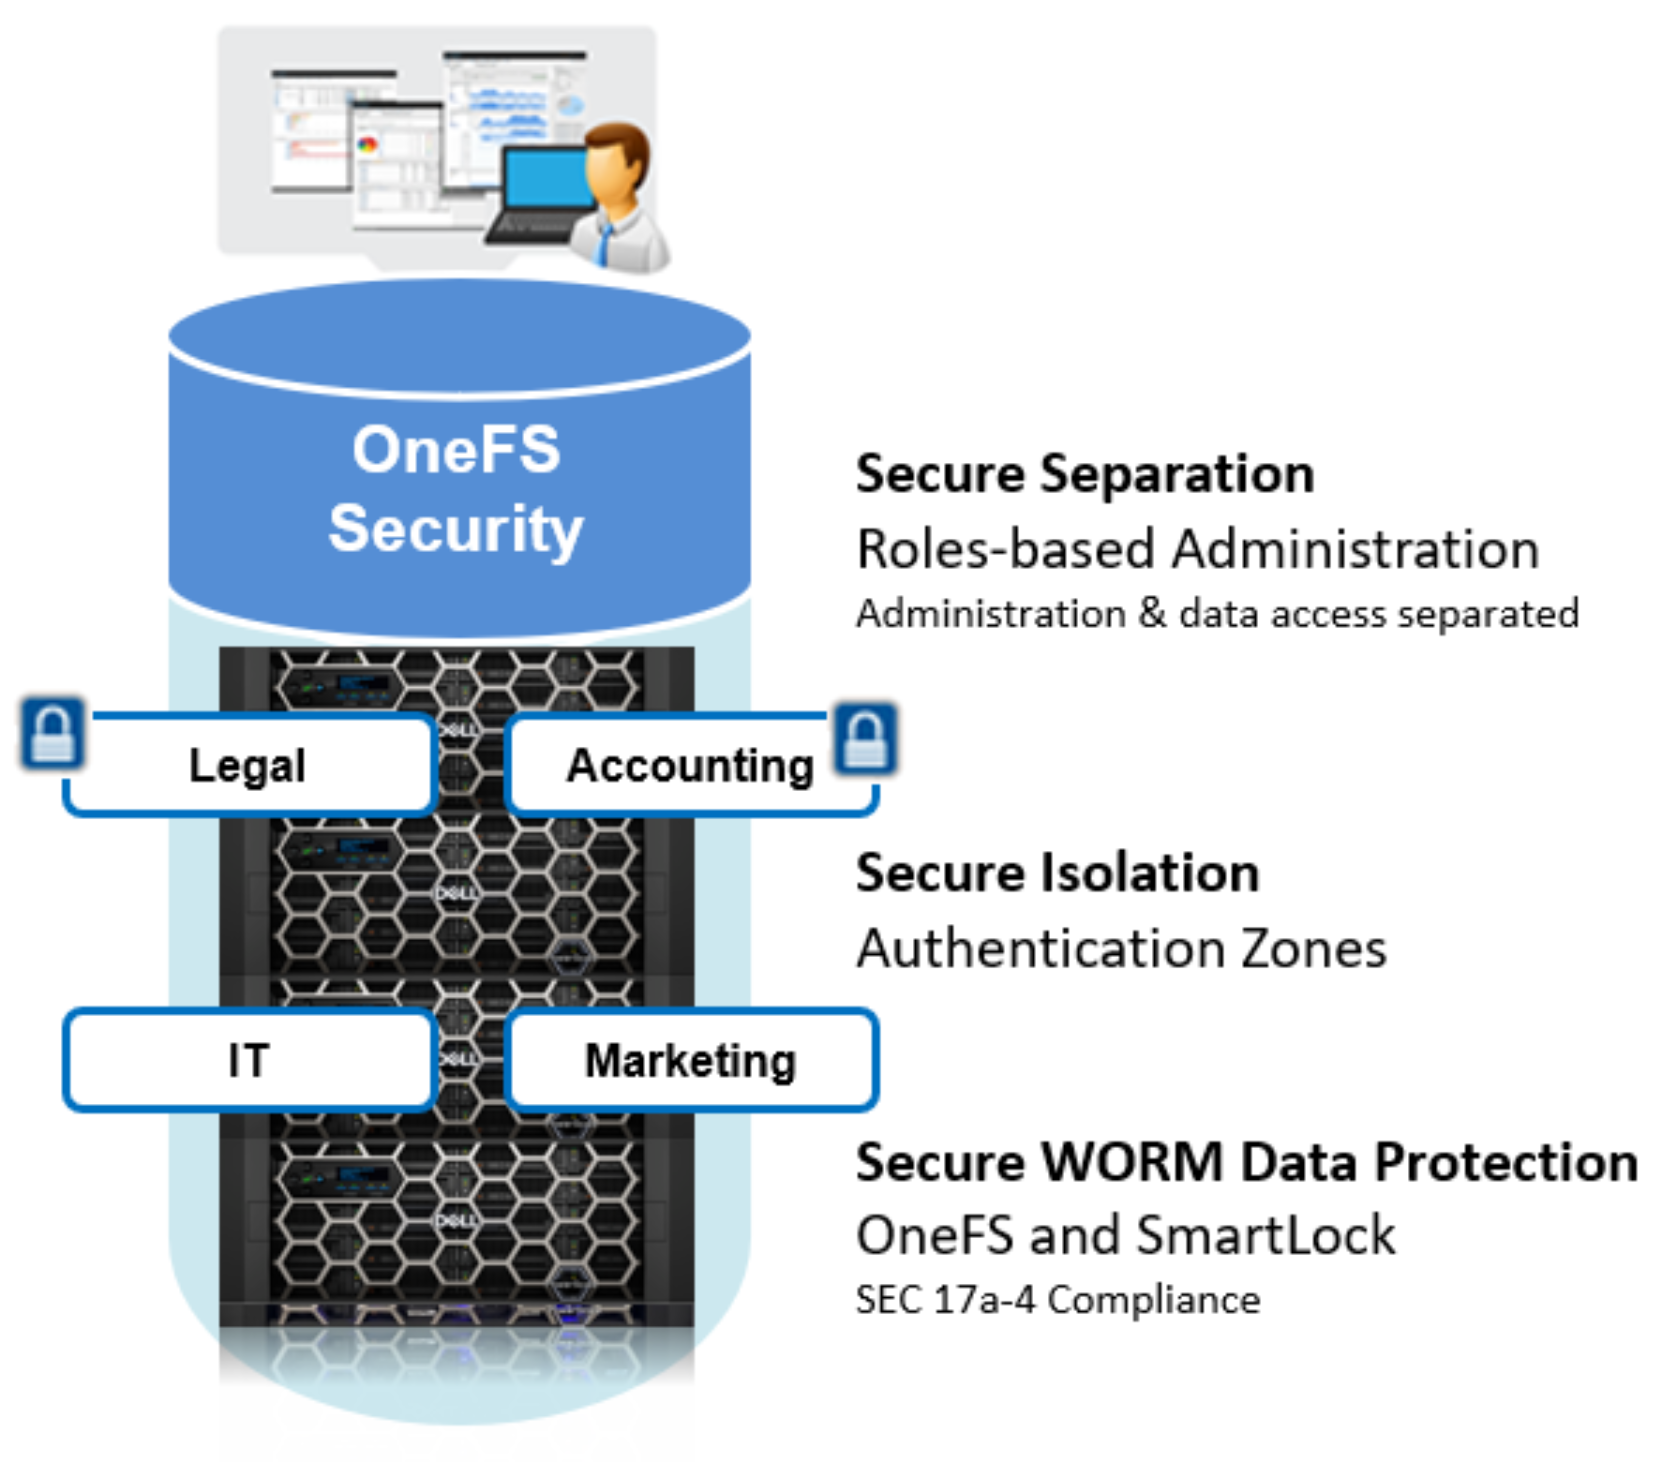 Graphic showing OneFS security options, including secure separation with RBAC, secure isolation with zones, and data immutability with SmartLock WORM. 